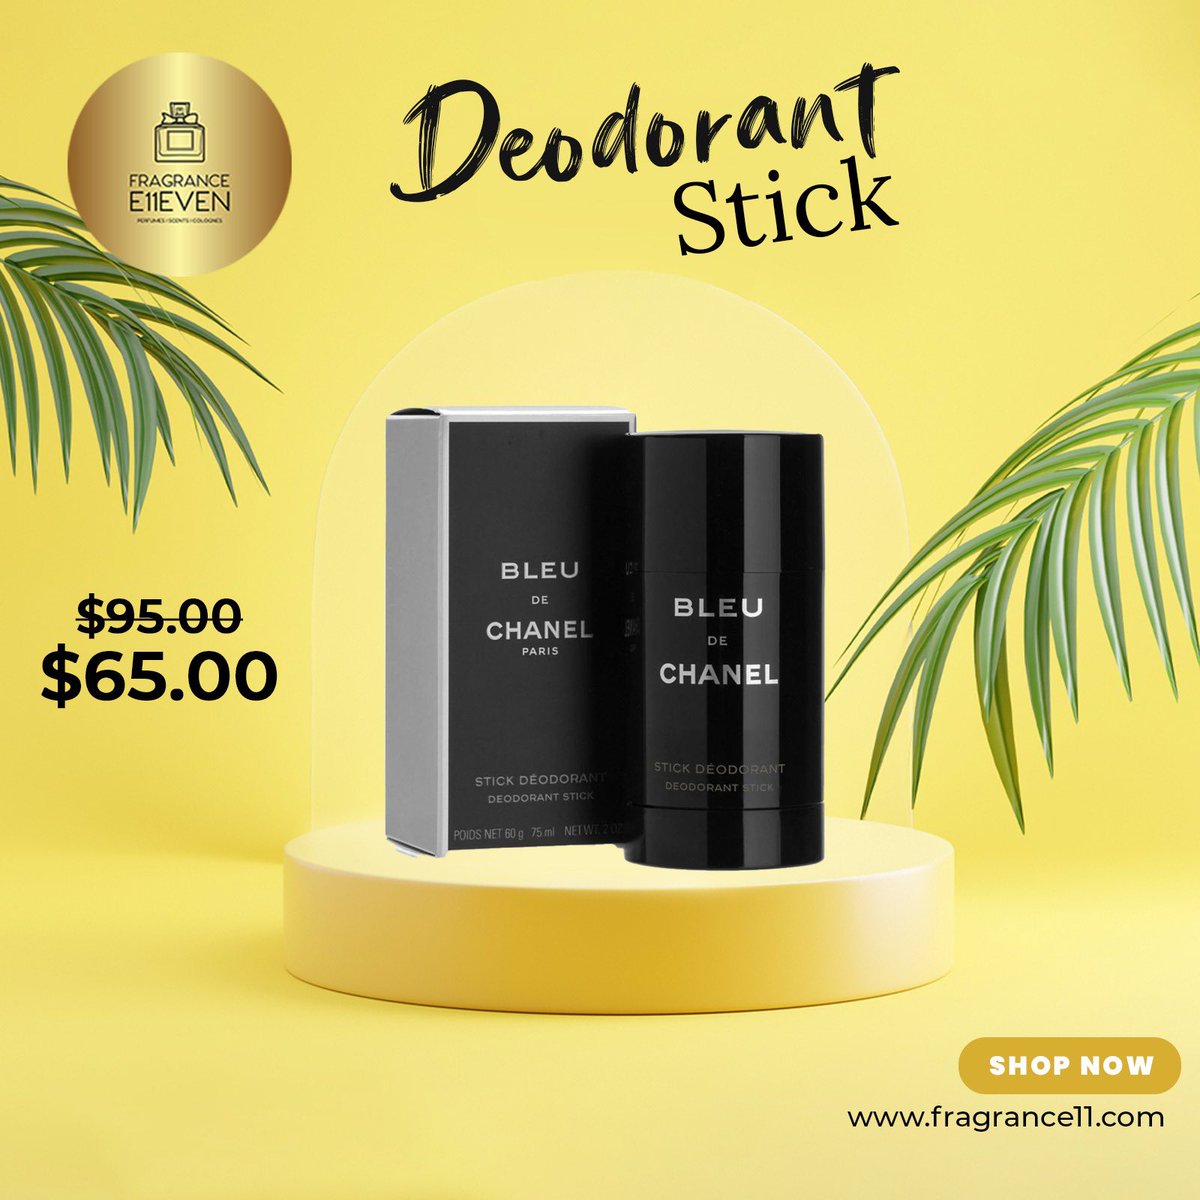 A deodorant stick featuring the woody, aromatic notes of BLEU DE CHANEL. 

#fragrance11 #fragrance #fragrances #scentoftheday #fragrancelover #perfumeaddict #perfumelovers #perfumelover #scents #fragranceaddict #cologne #smellgood #nichefragrance #nichefragrance